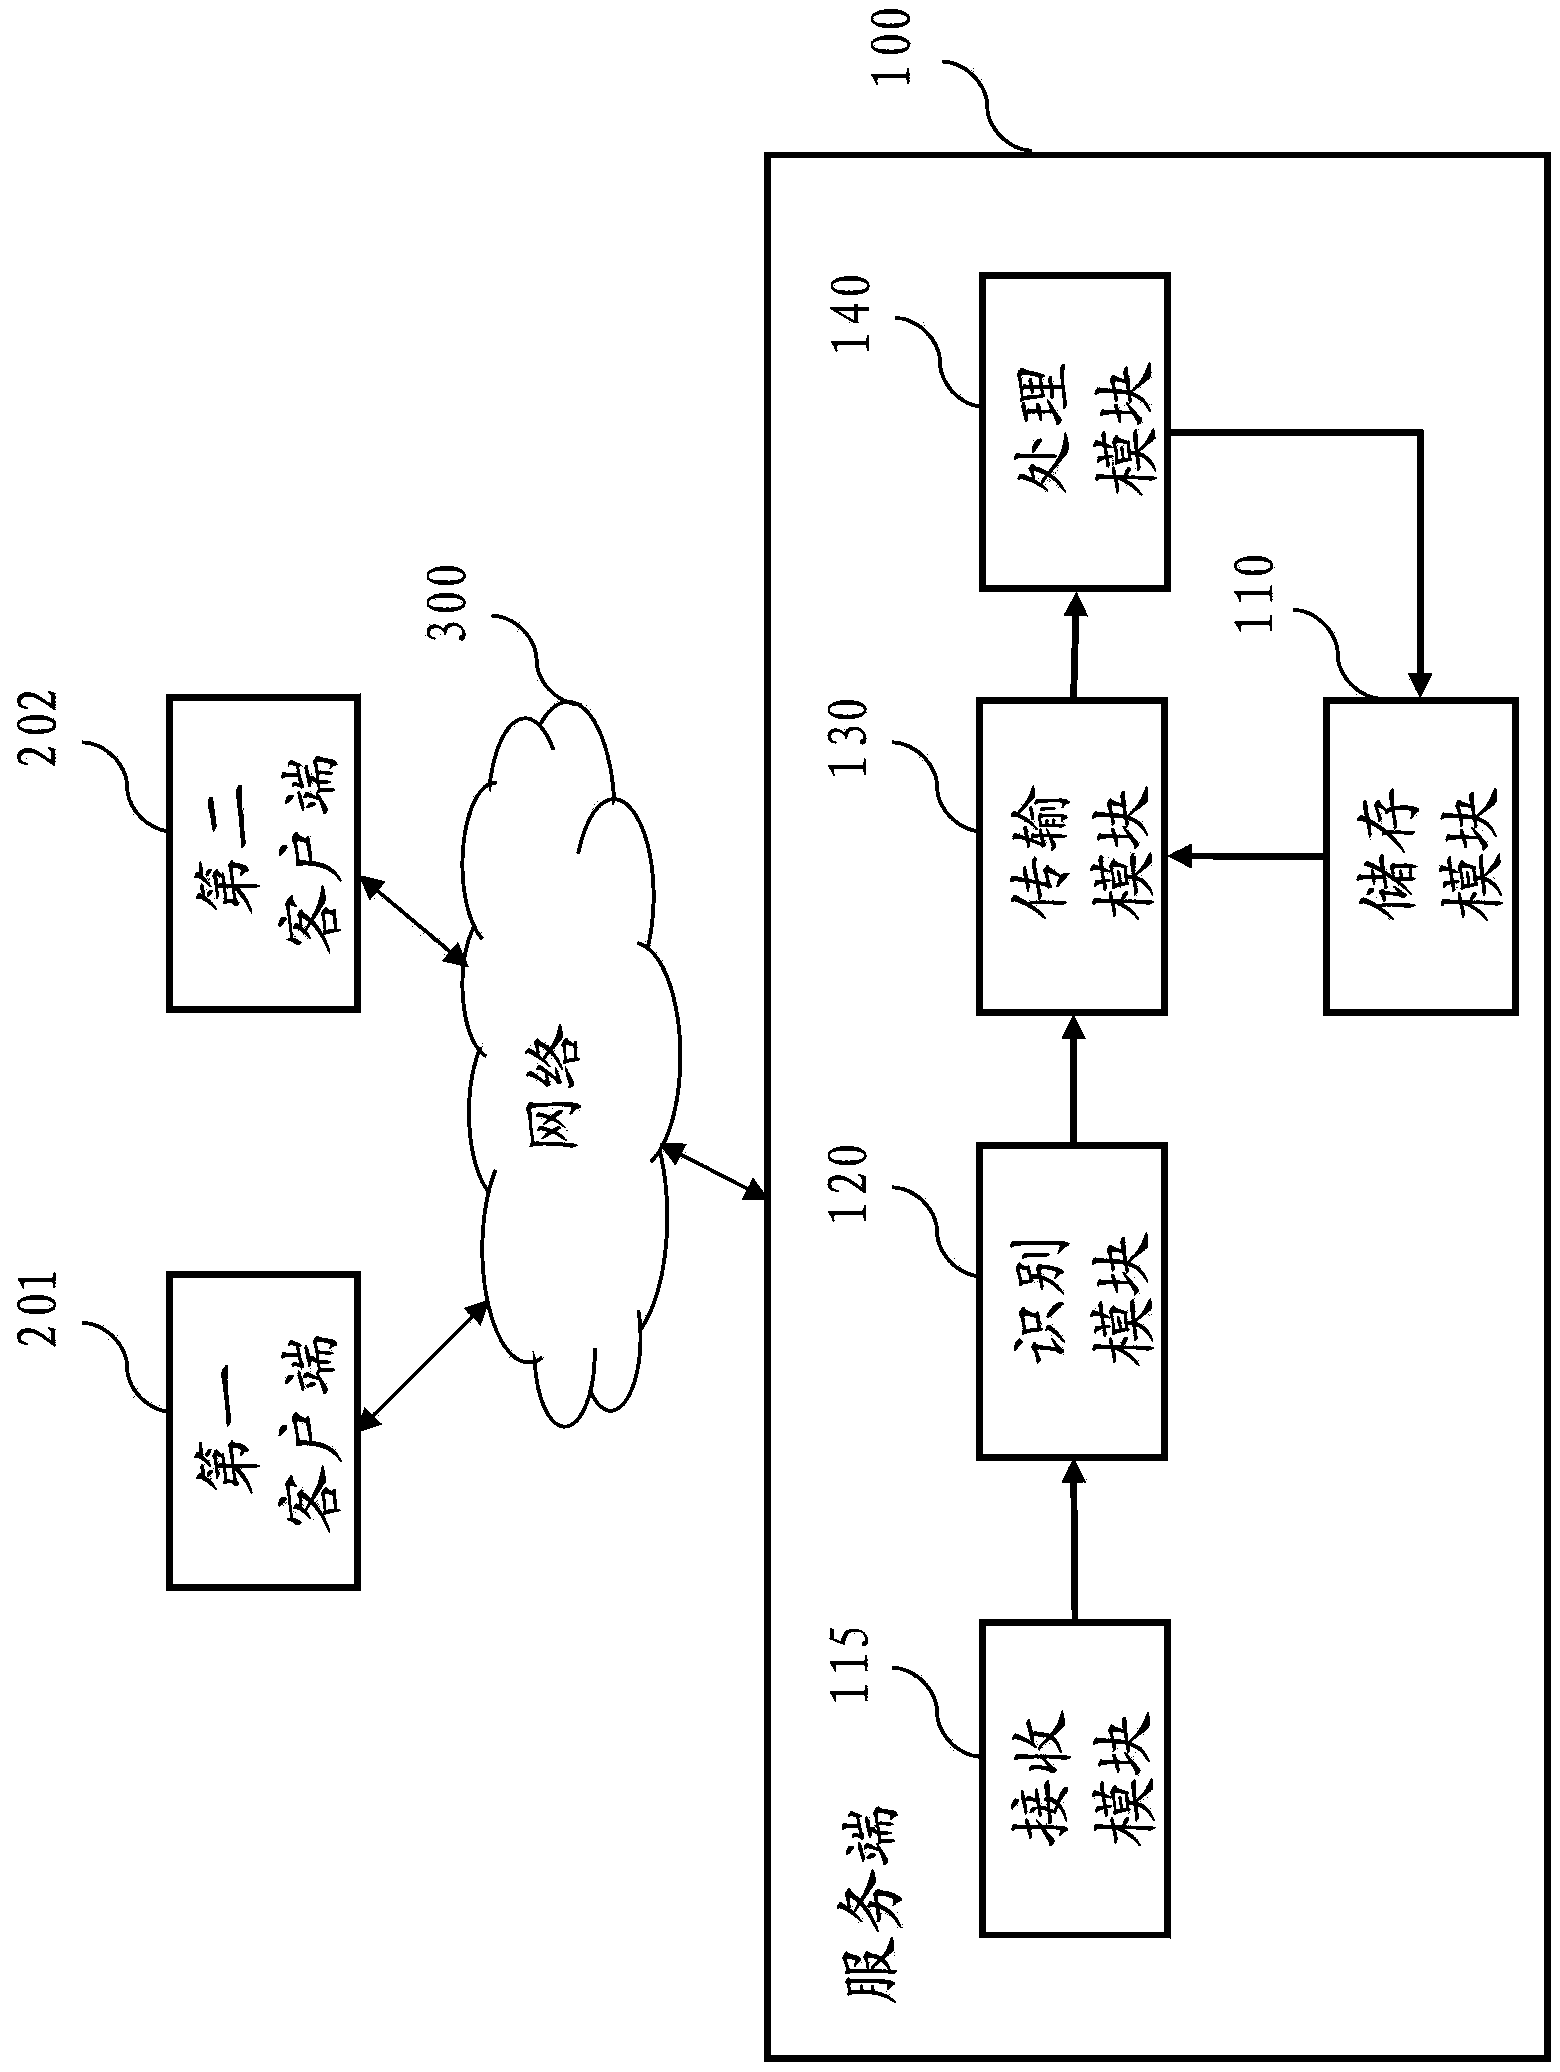 Travel route planning system based on Cloud and method of travel route planning system